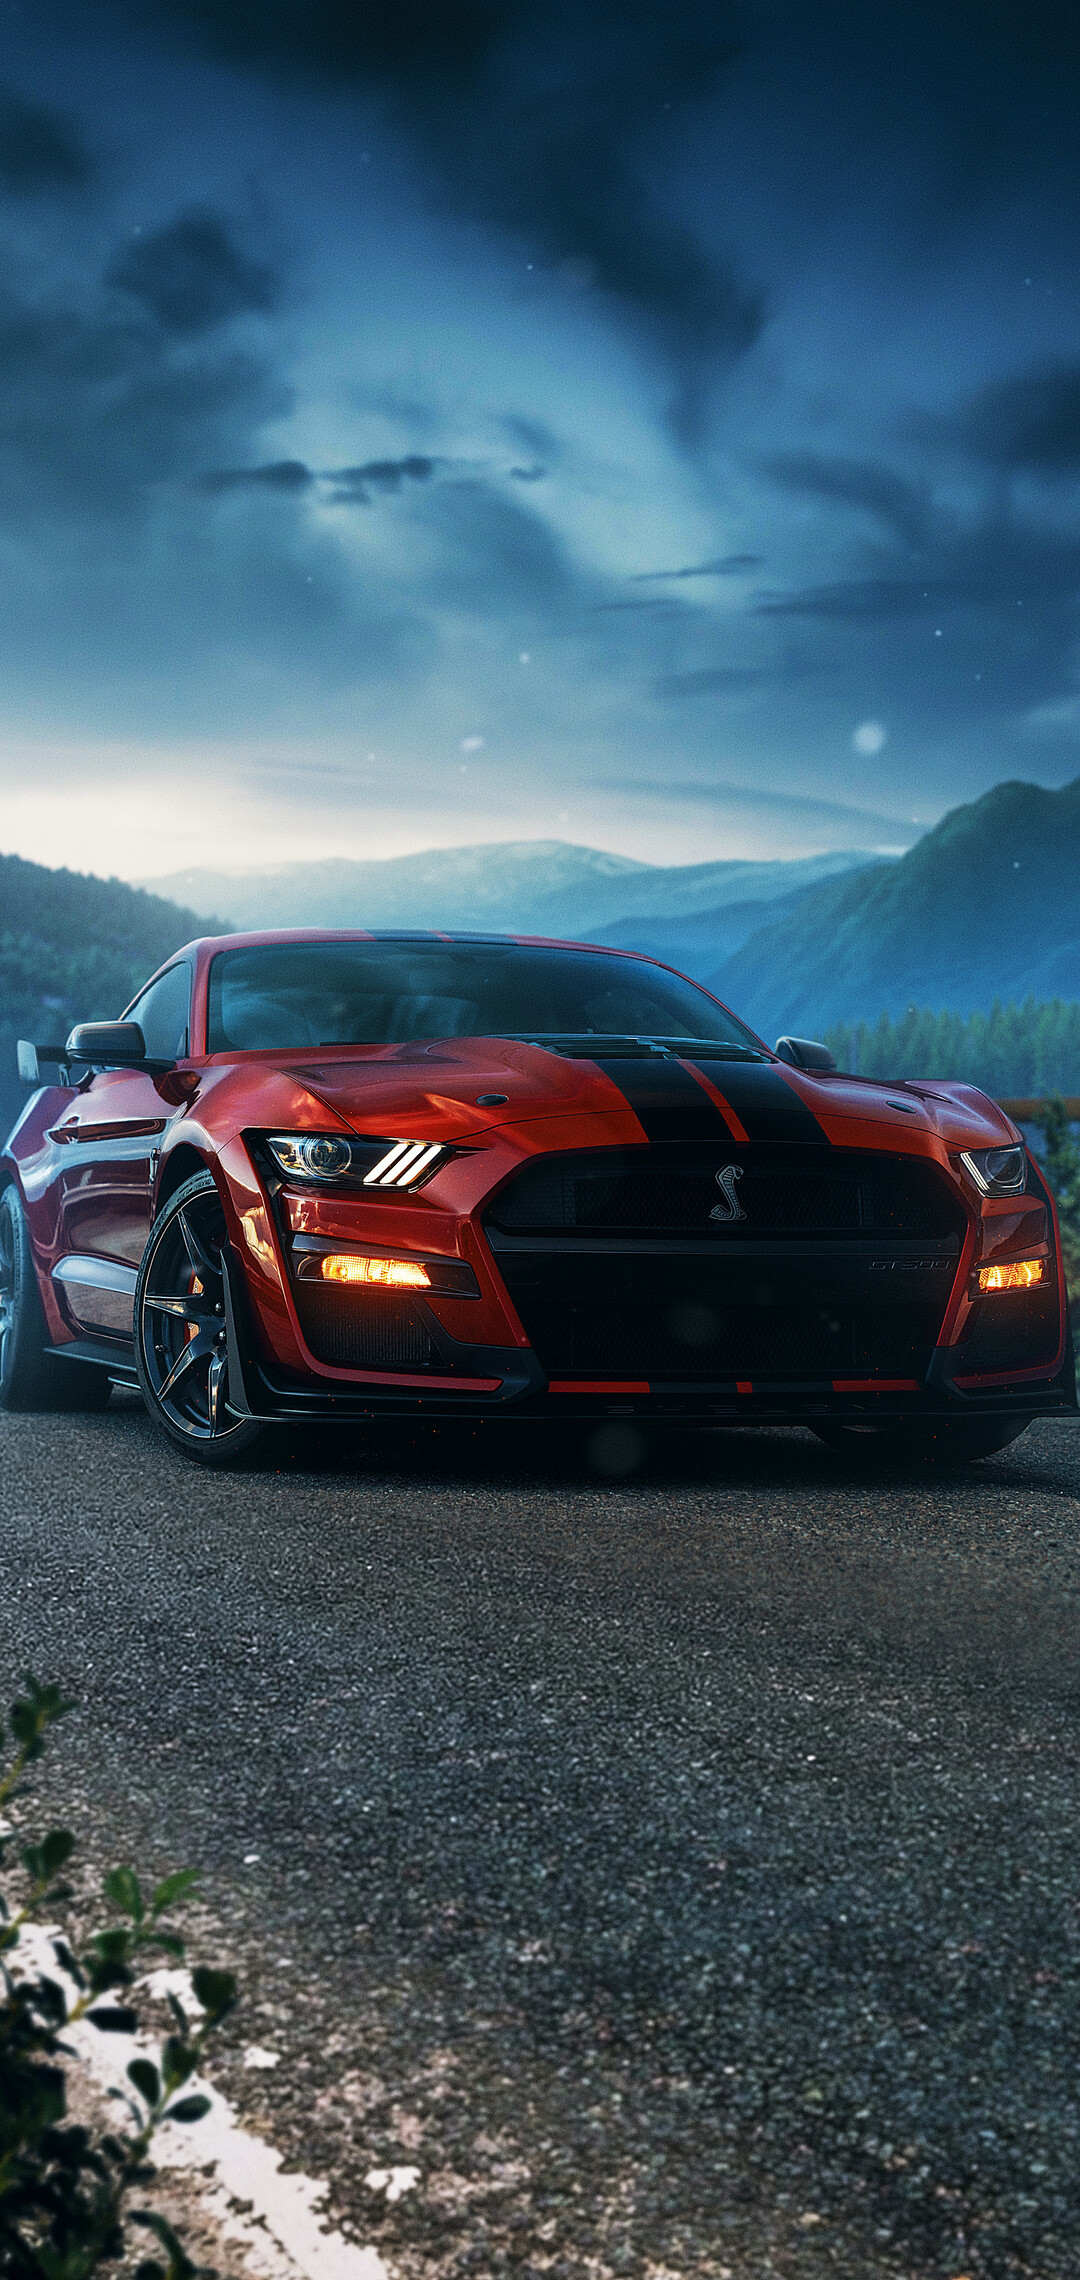 Ford: Automobile company that sells a broad range of automobiles worldwide, and an additional range of luxury automobiles under the Lincoln marque. 1080x2280 HD Wallpaper.